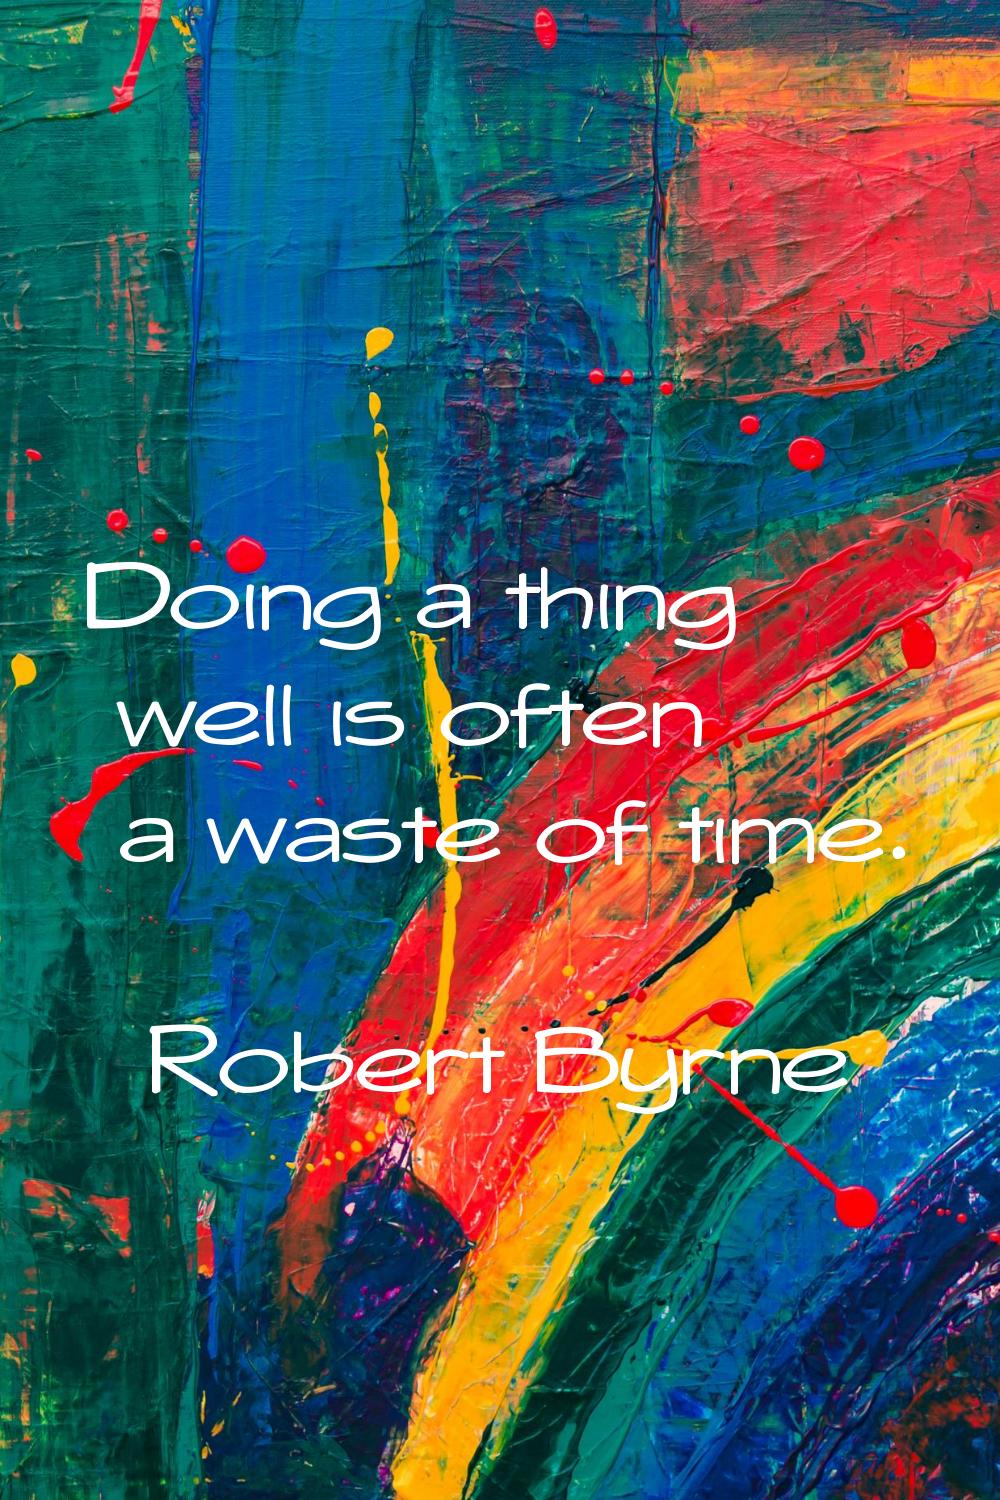 Doing a thing well is often a waste of time.